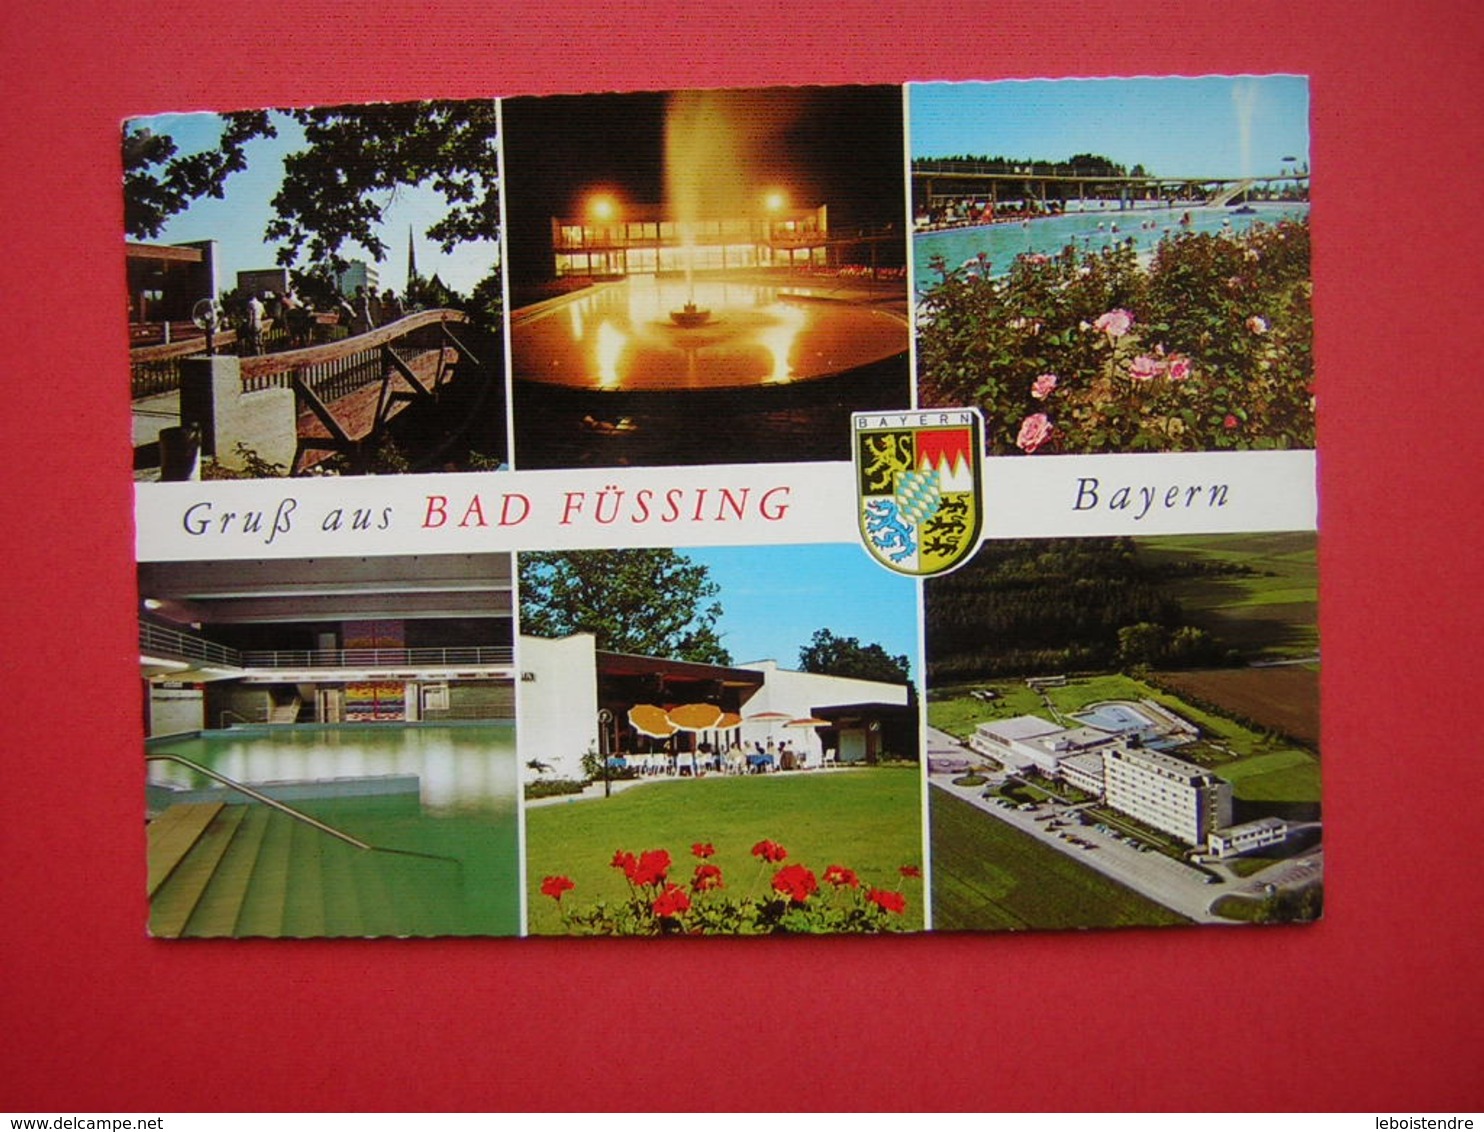 CPSM ALLEMAGNE MULTI VUES  GRUB AUS BAD FUSSING BAYERN    VOYAGEE 1973 TIMBRE - Bad Füssing